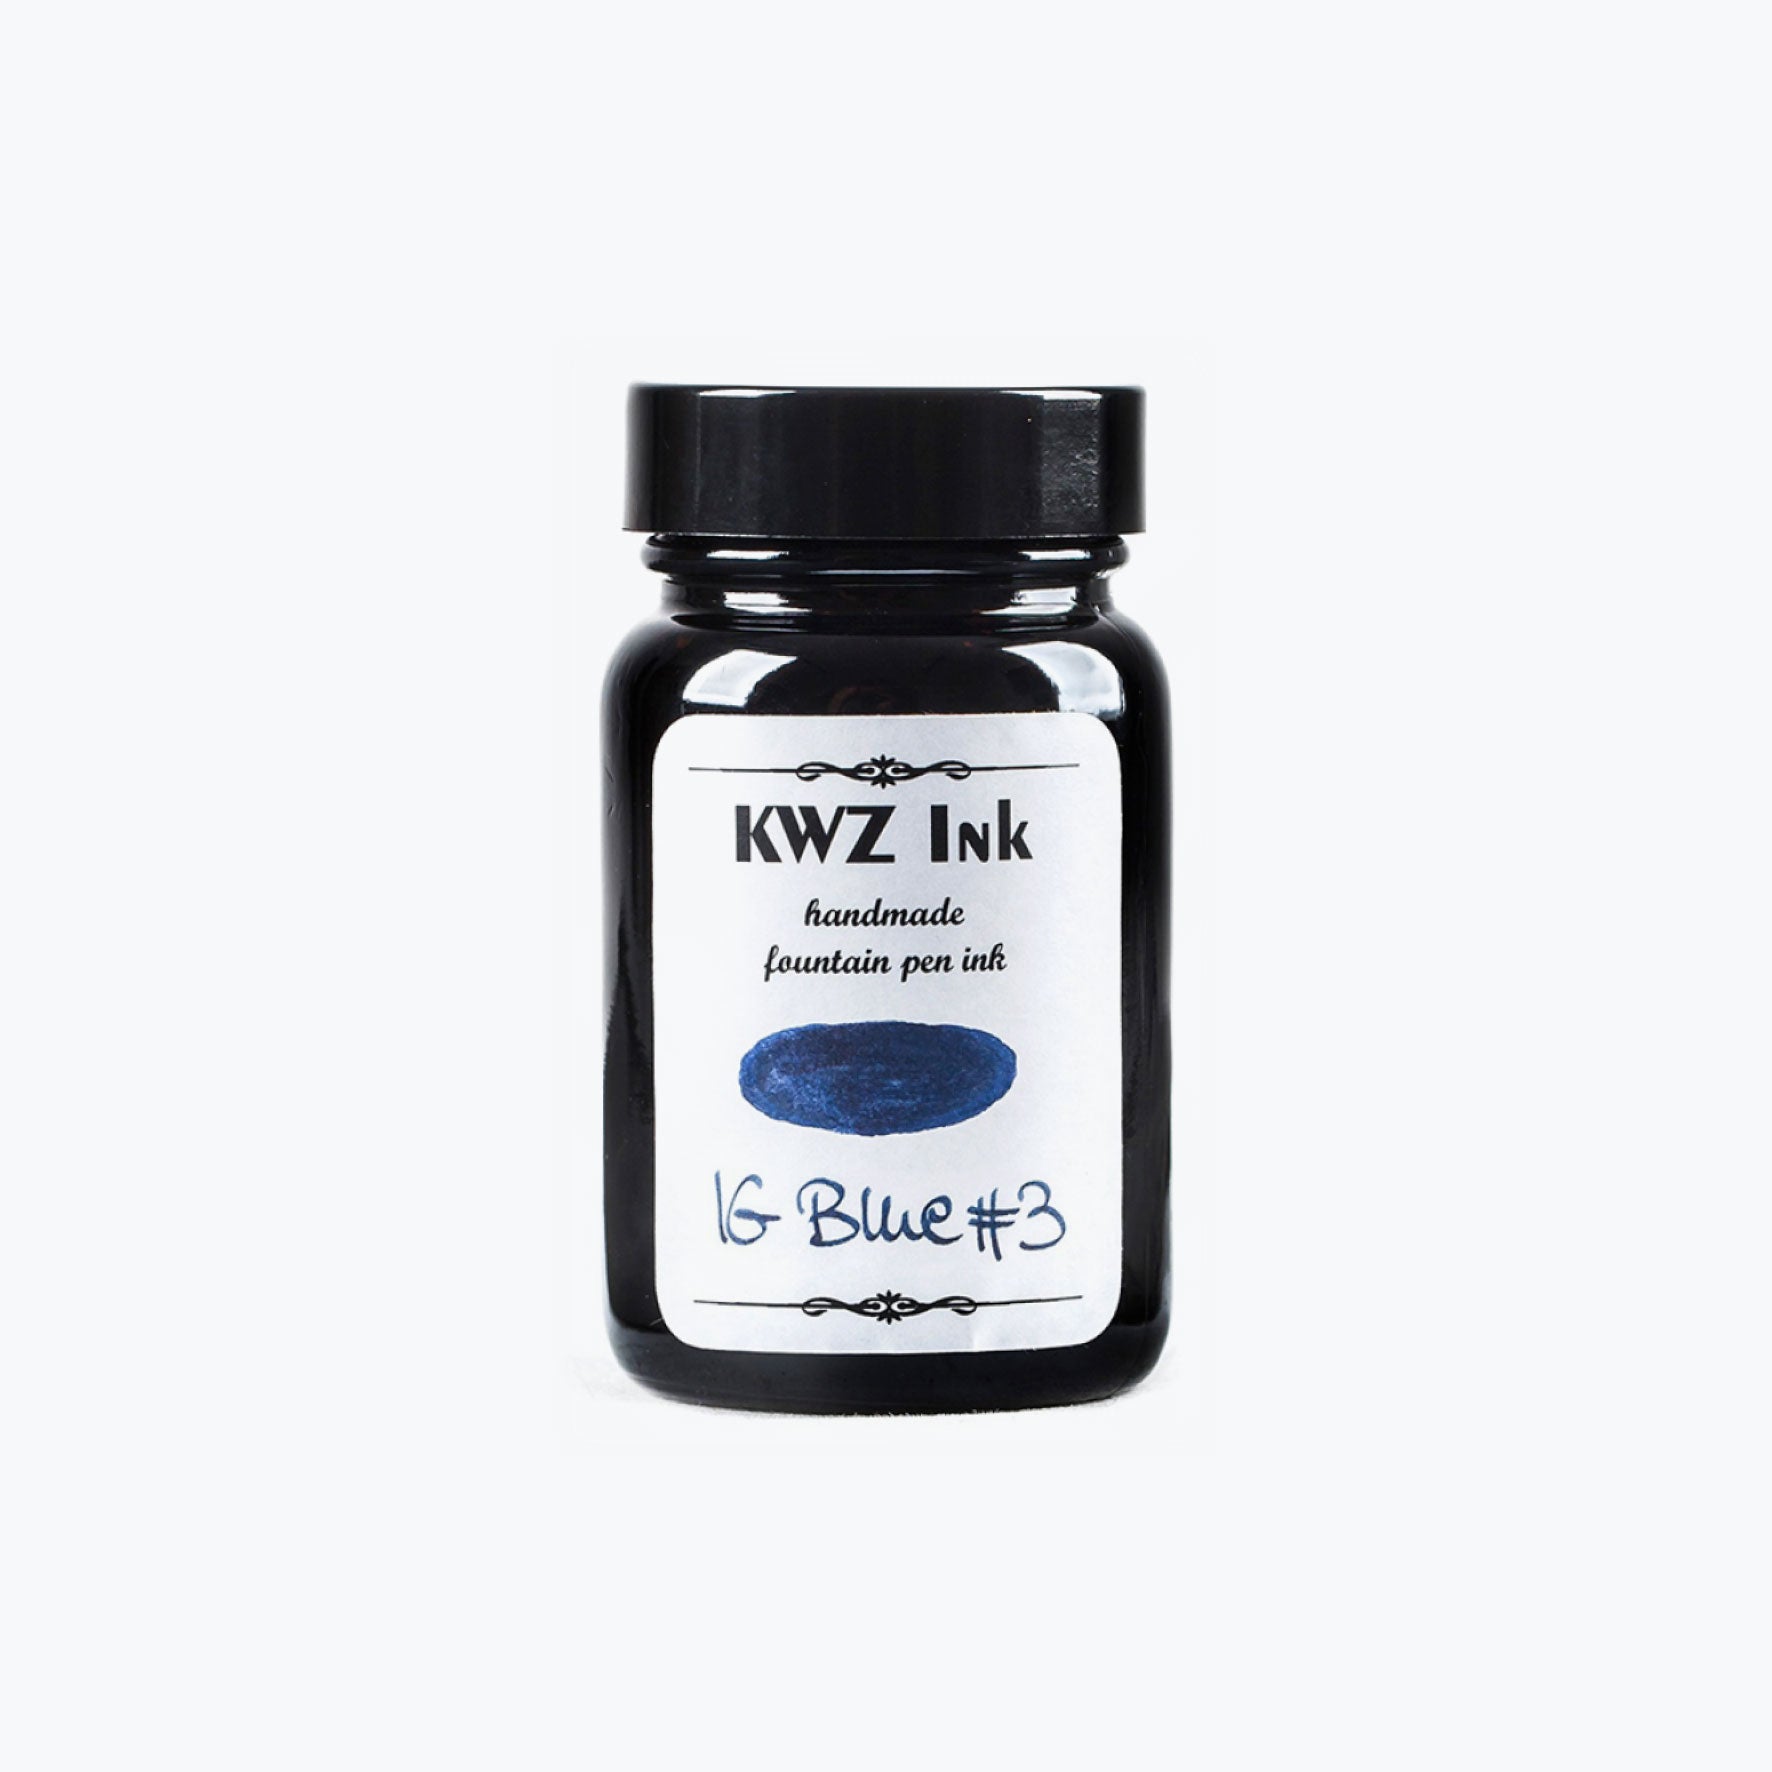 KWZ - Fountain Pen Ink - Iron Gall - IG Blue #3